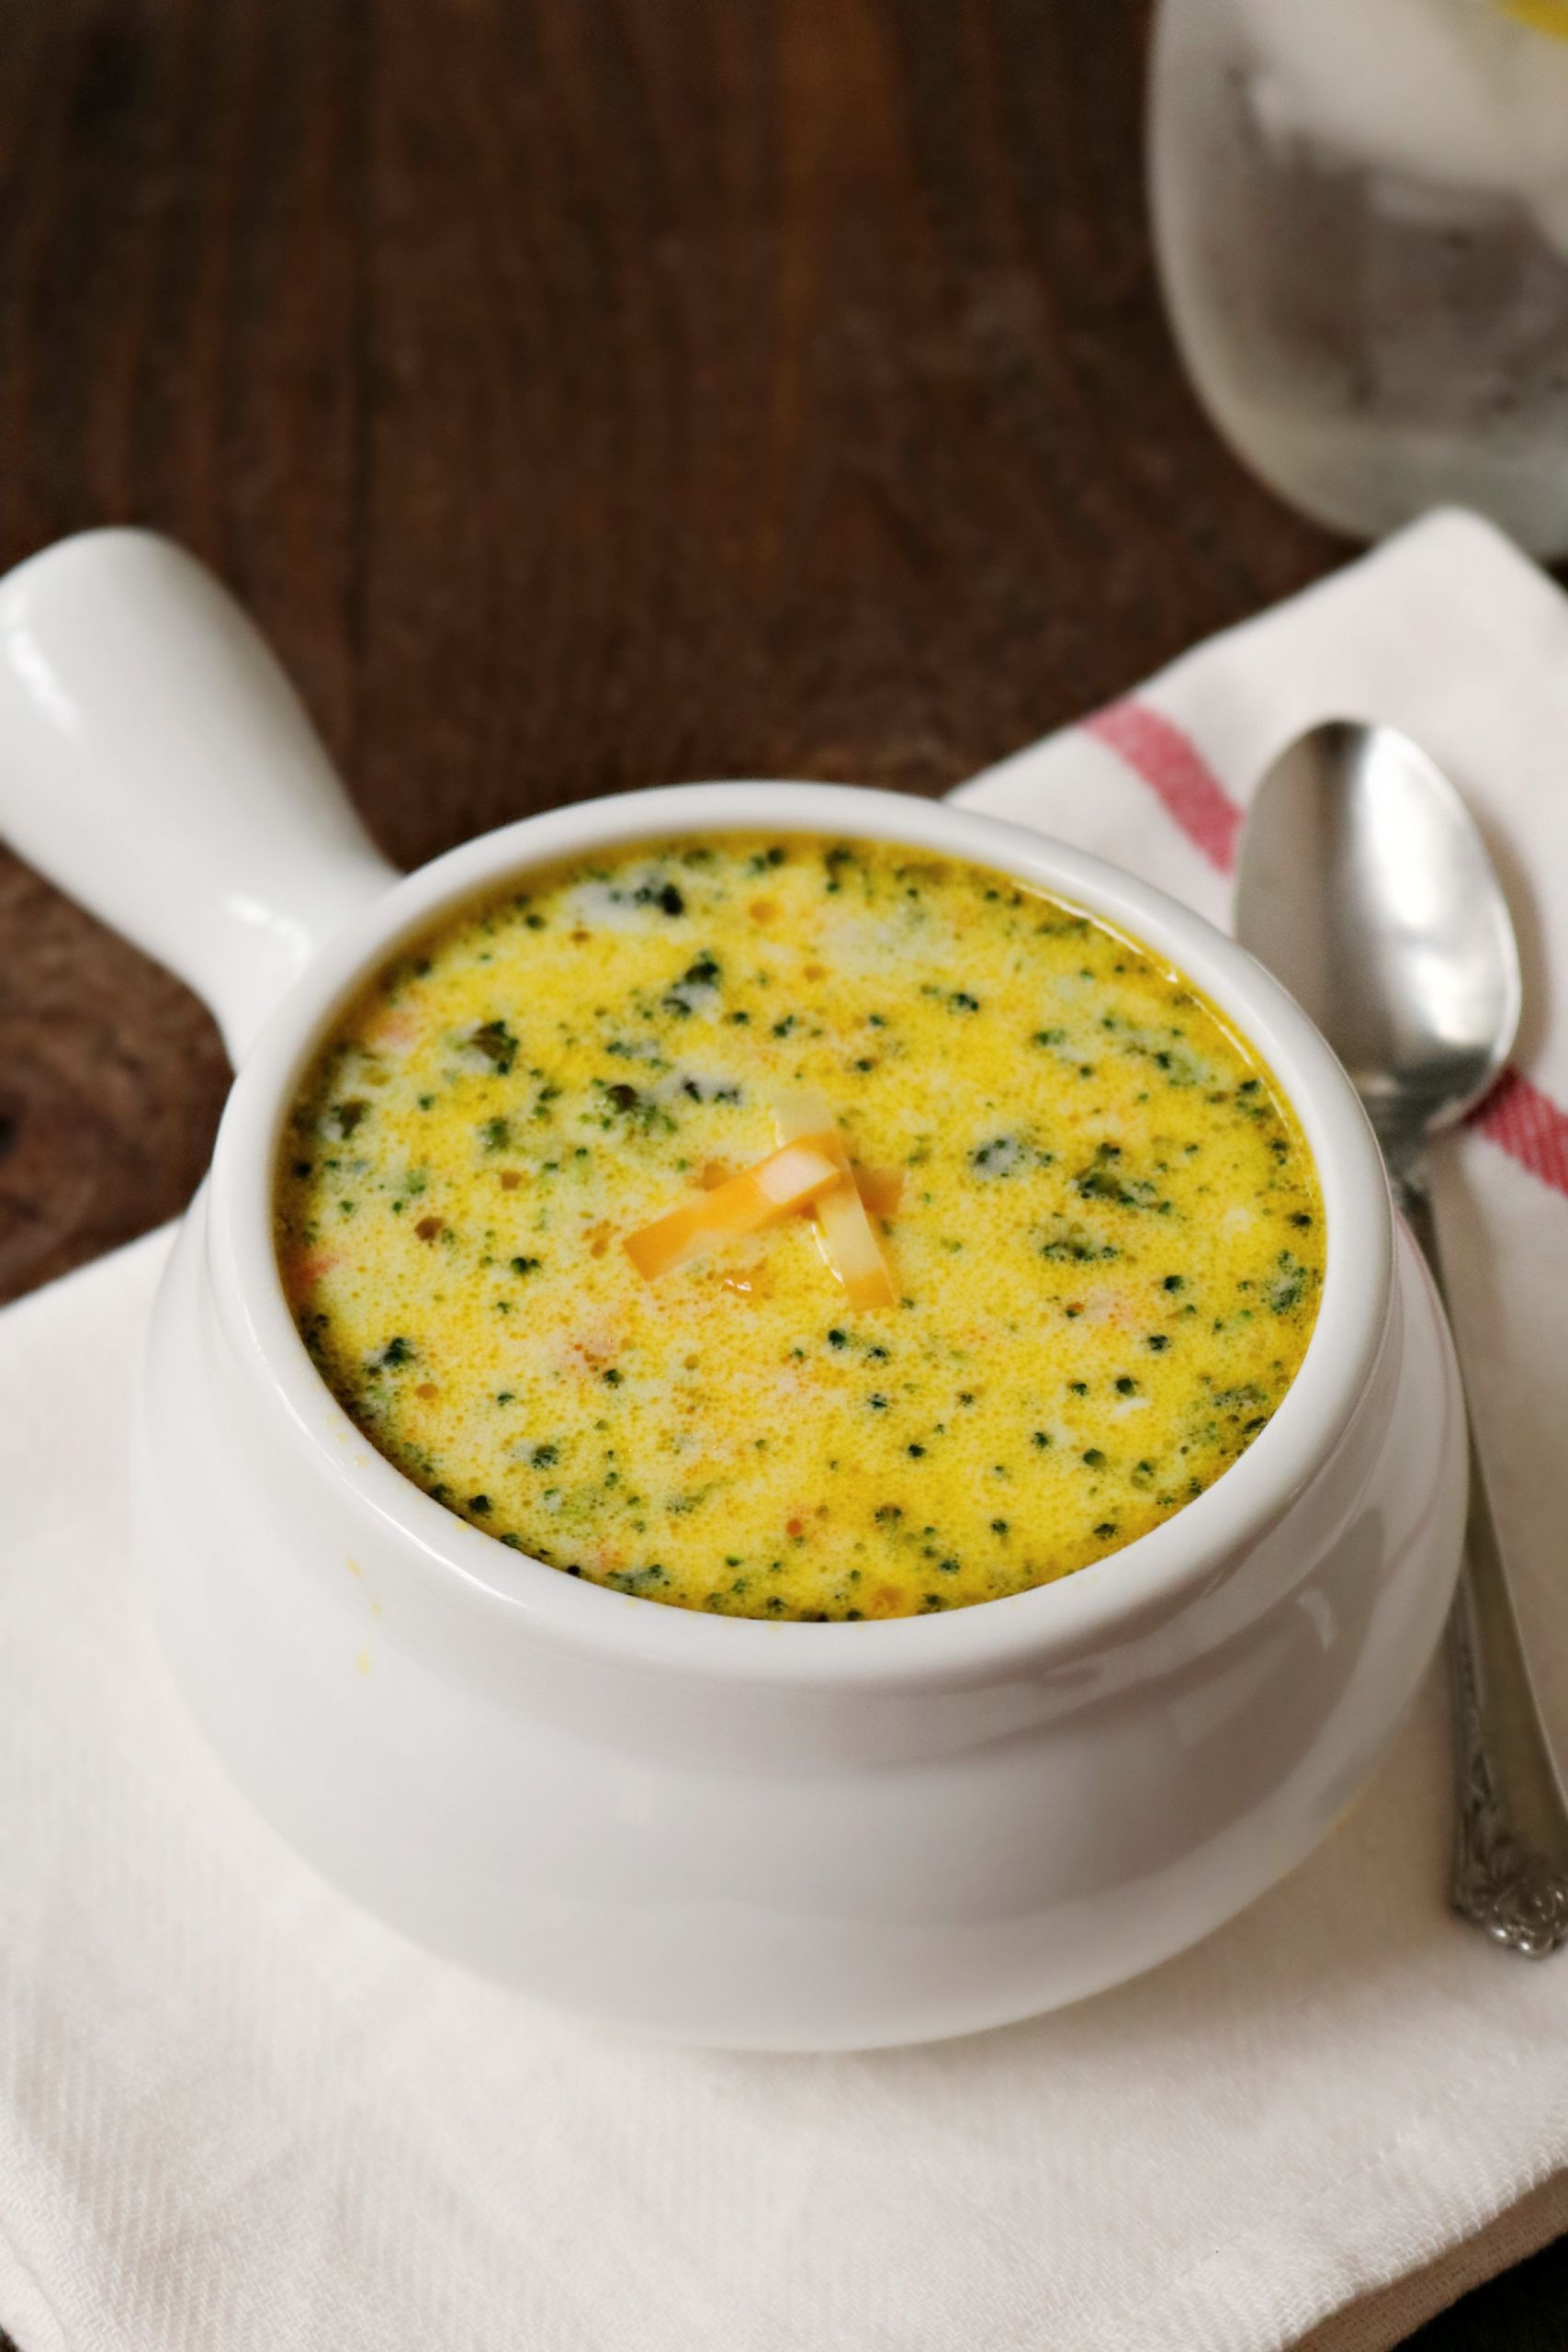 Cheese and Broccoli soup Awesome Broccoli Cheese soup Recipe Not Quite Susie Homemaker